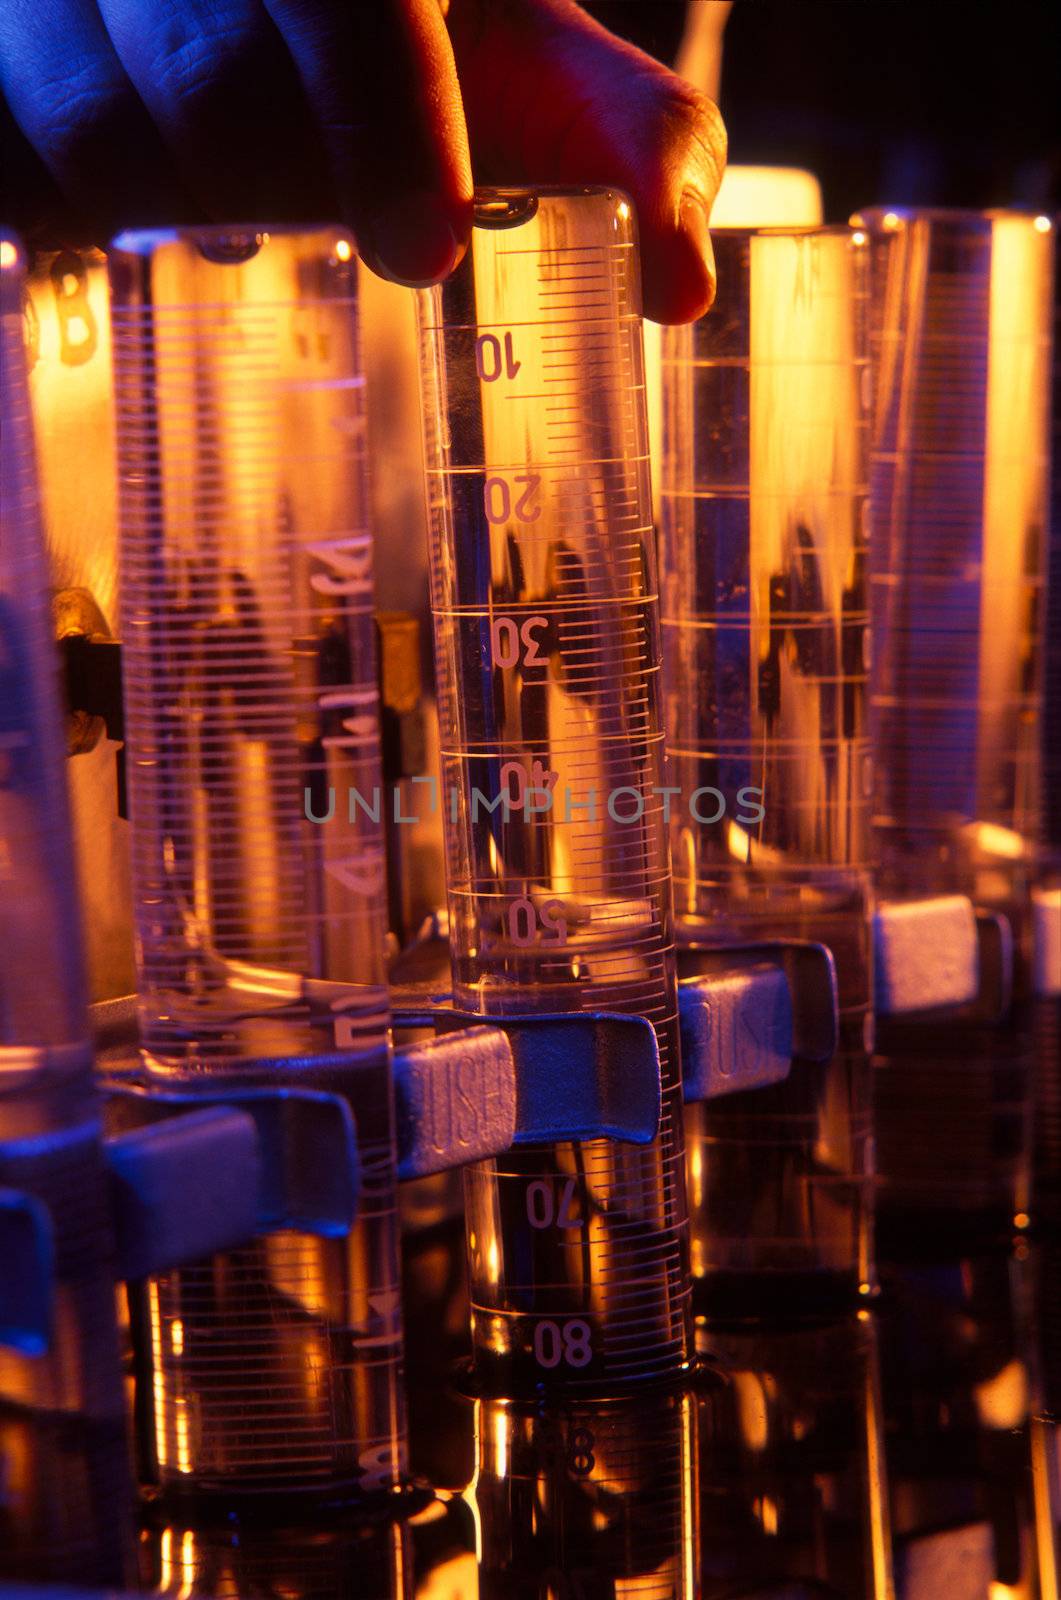 Test Tubes in Lab by hotflash2001